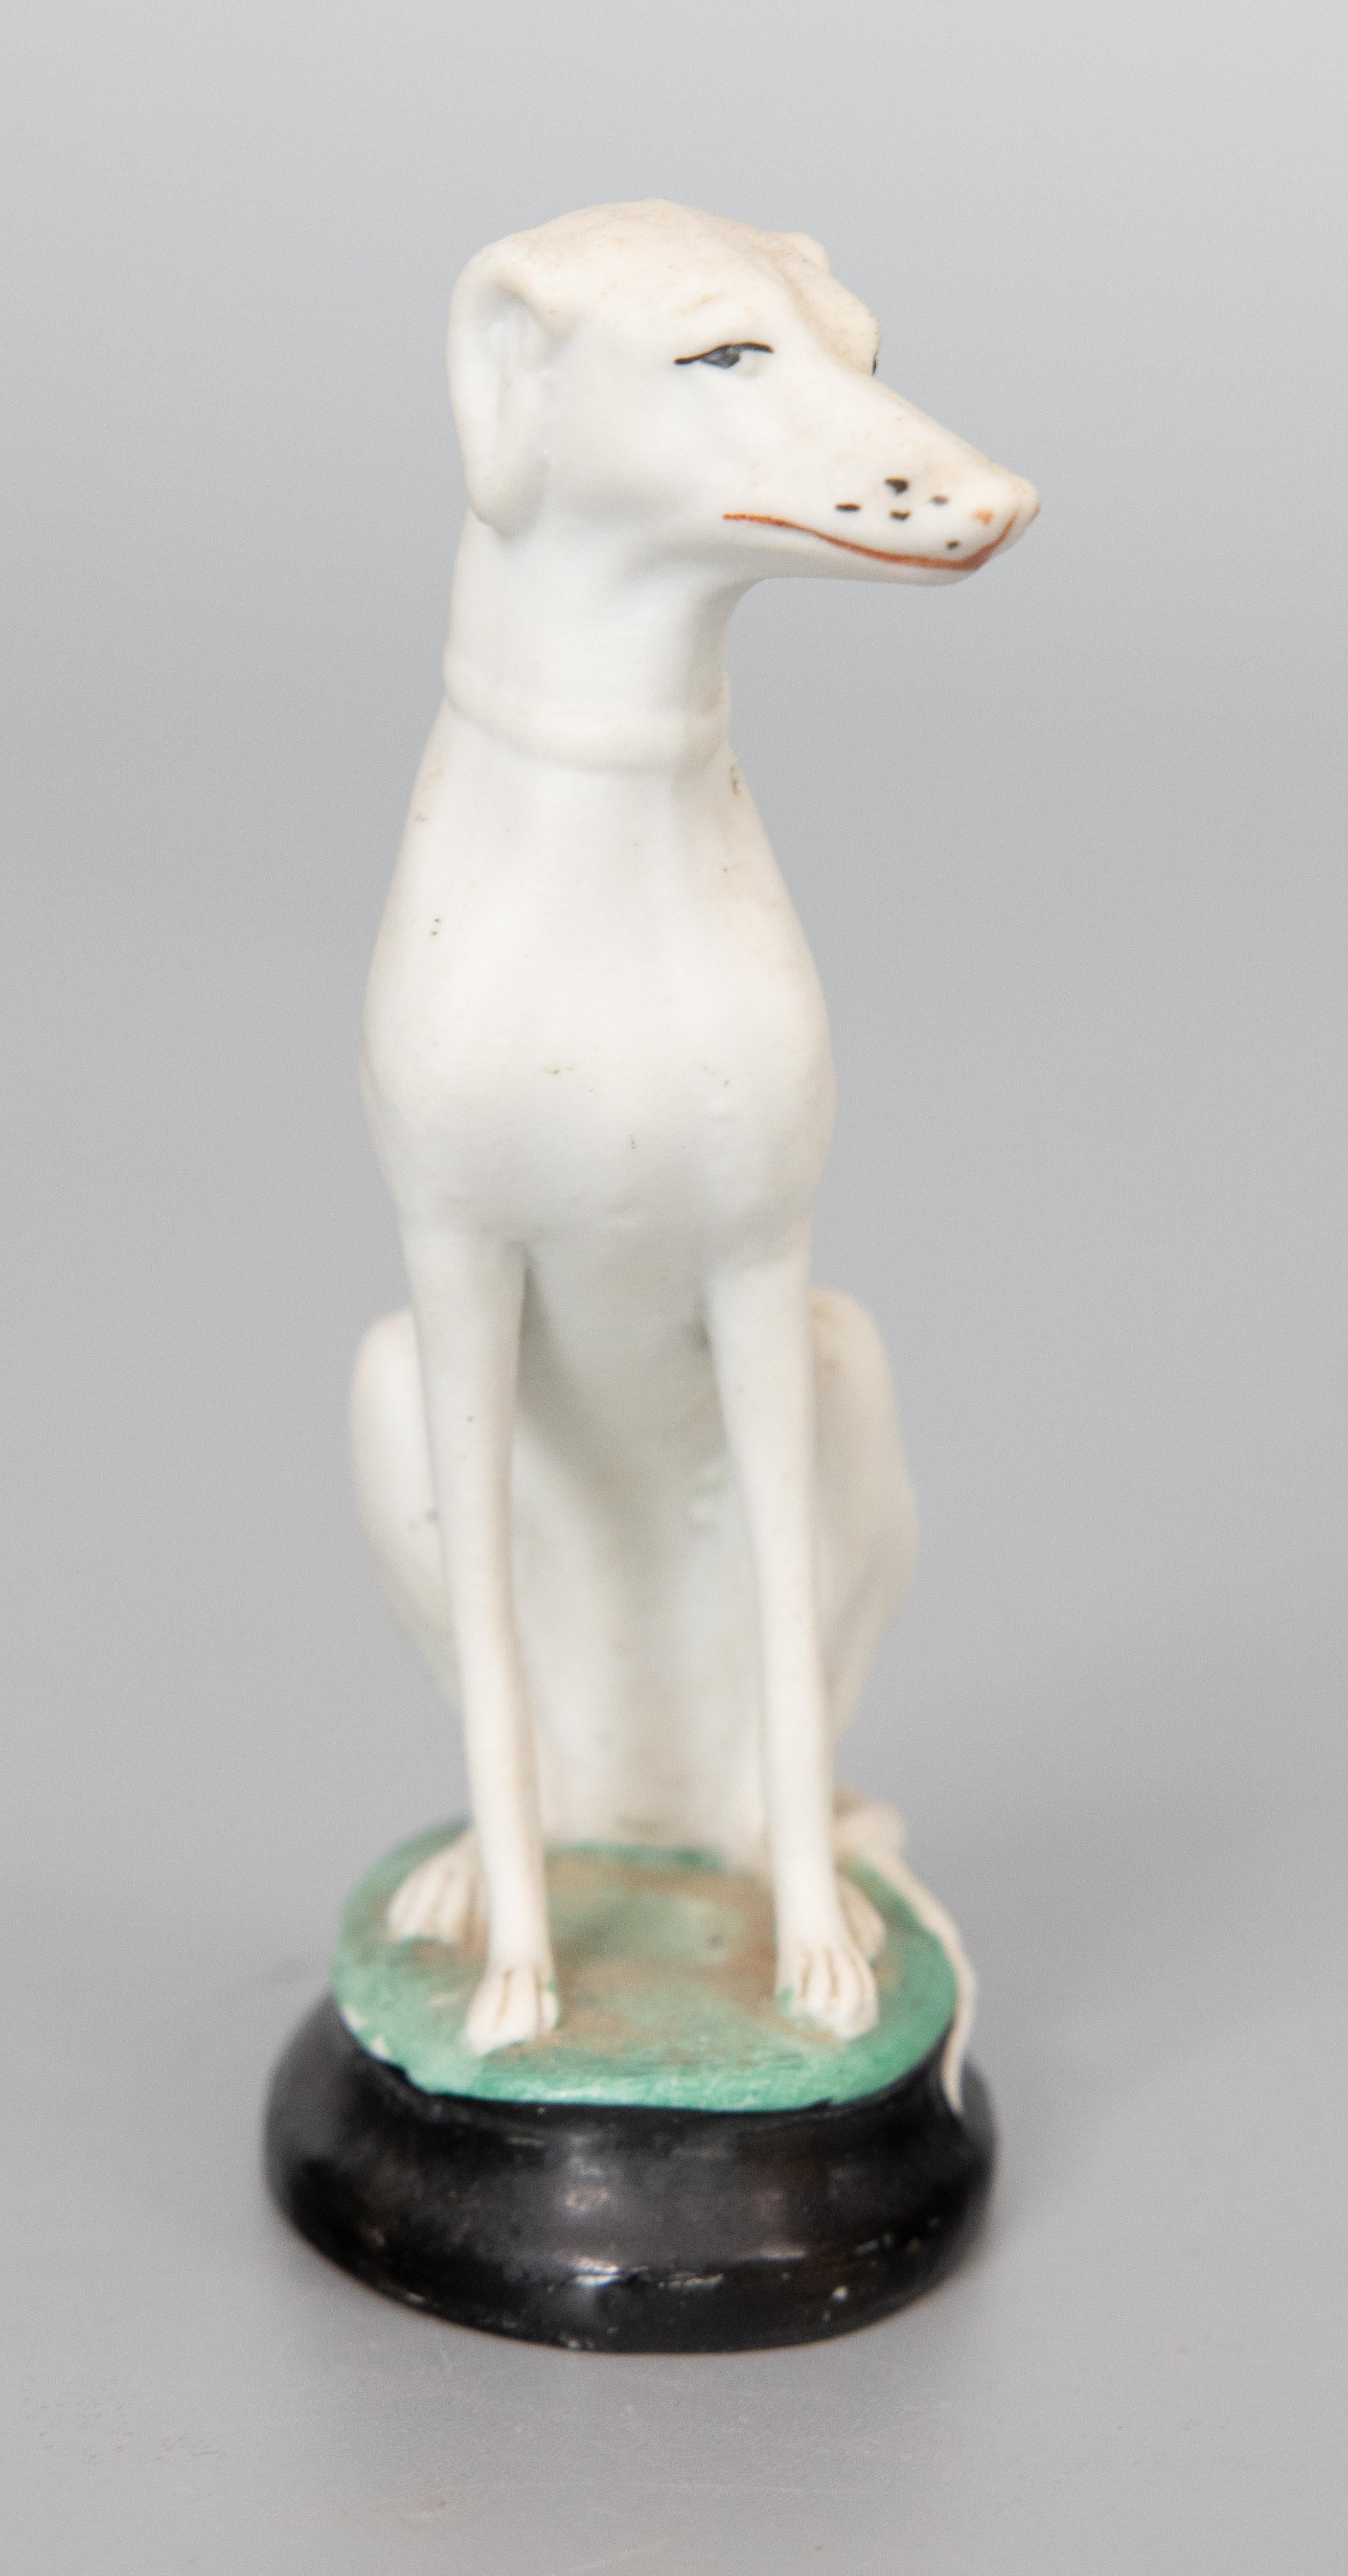 A superb antique 19th-Century English Staffordshire bisque Whippet / Greyhound dog figurine. This fine fellow is hand painted with exquisite details and would be perfect for the dog lover or collector.

DIMENSIONS
2